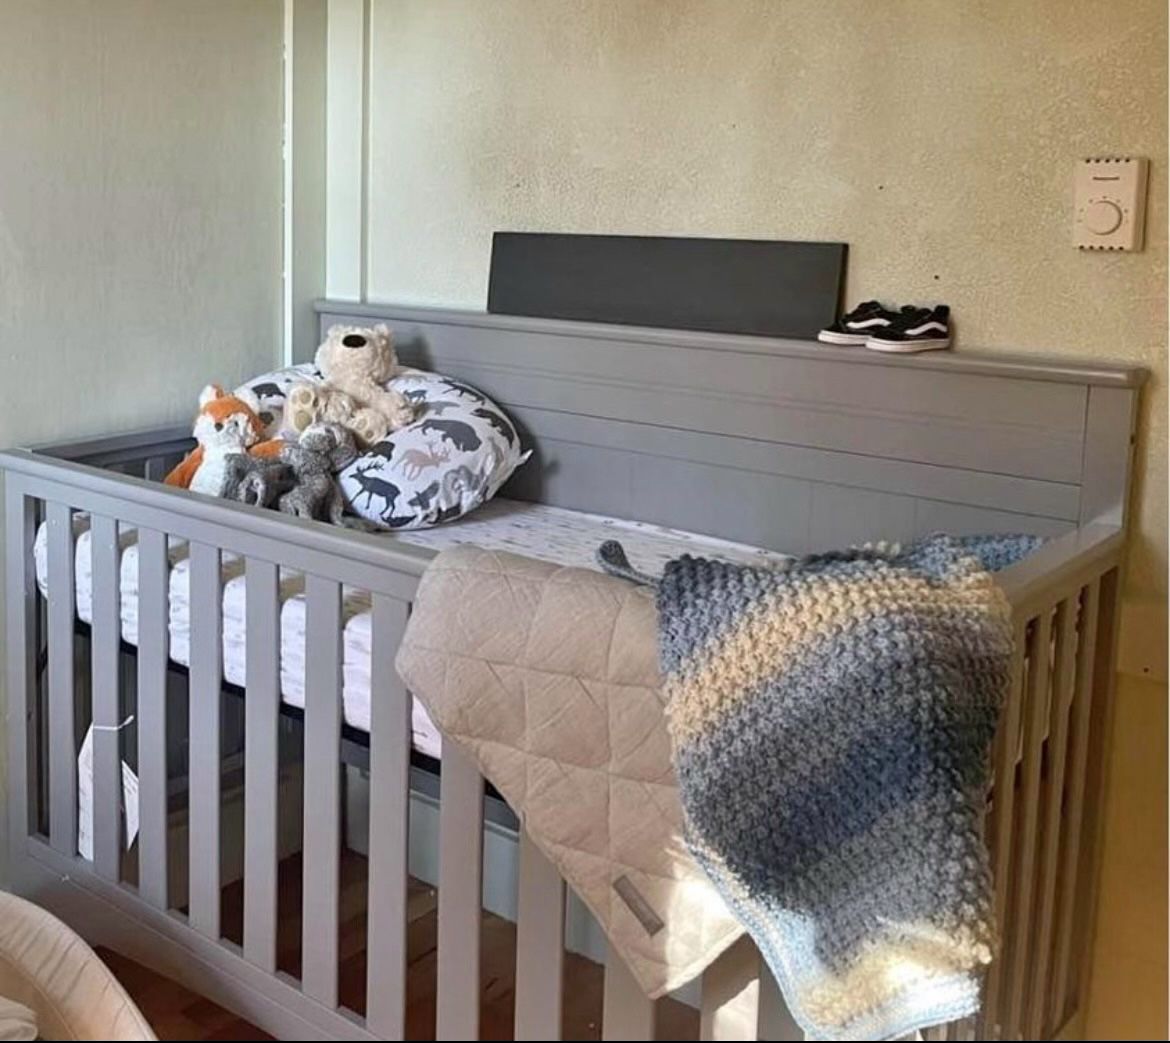 Crib. Disassembled Ready For Pickup. 